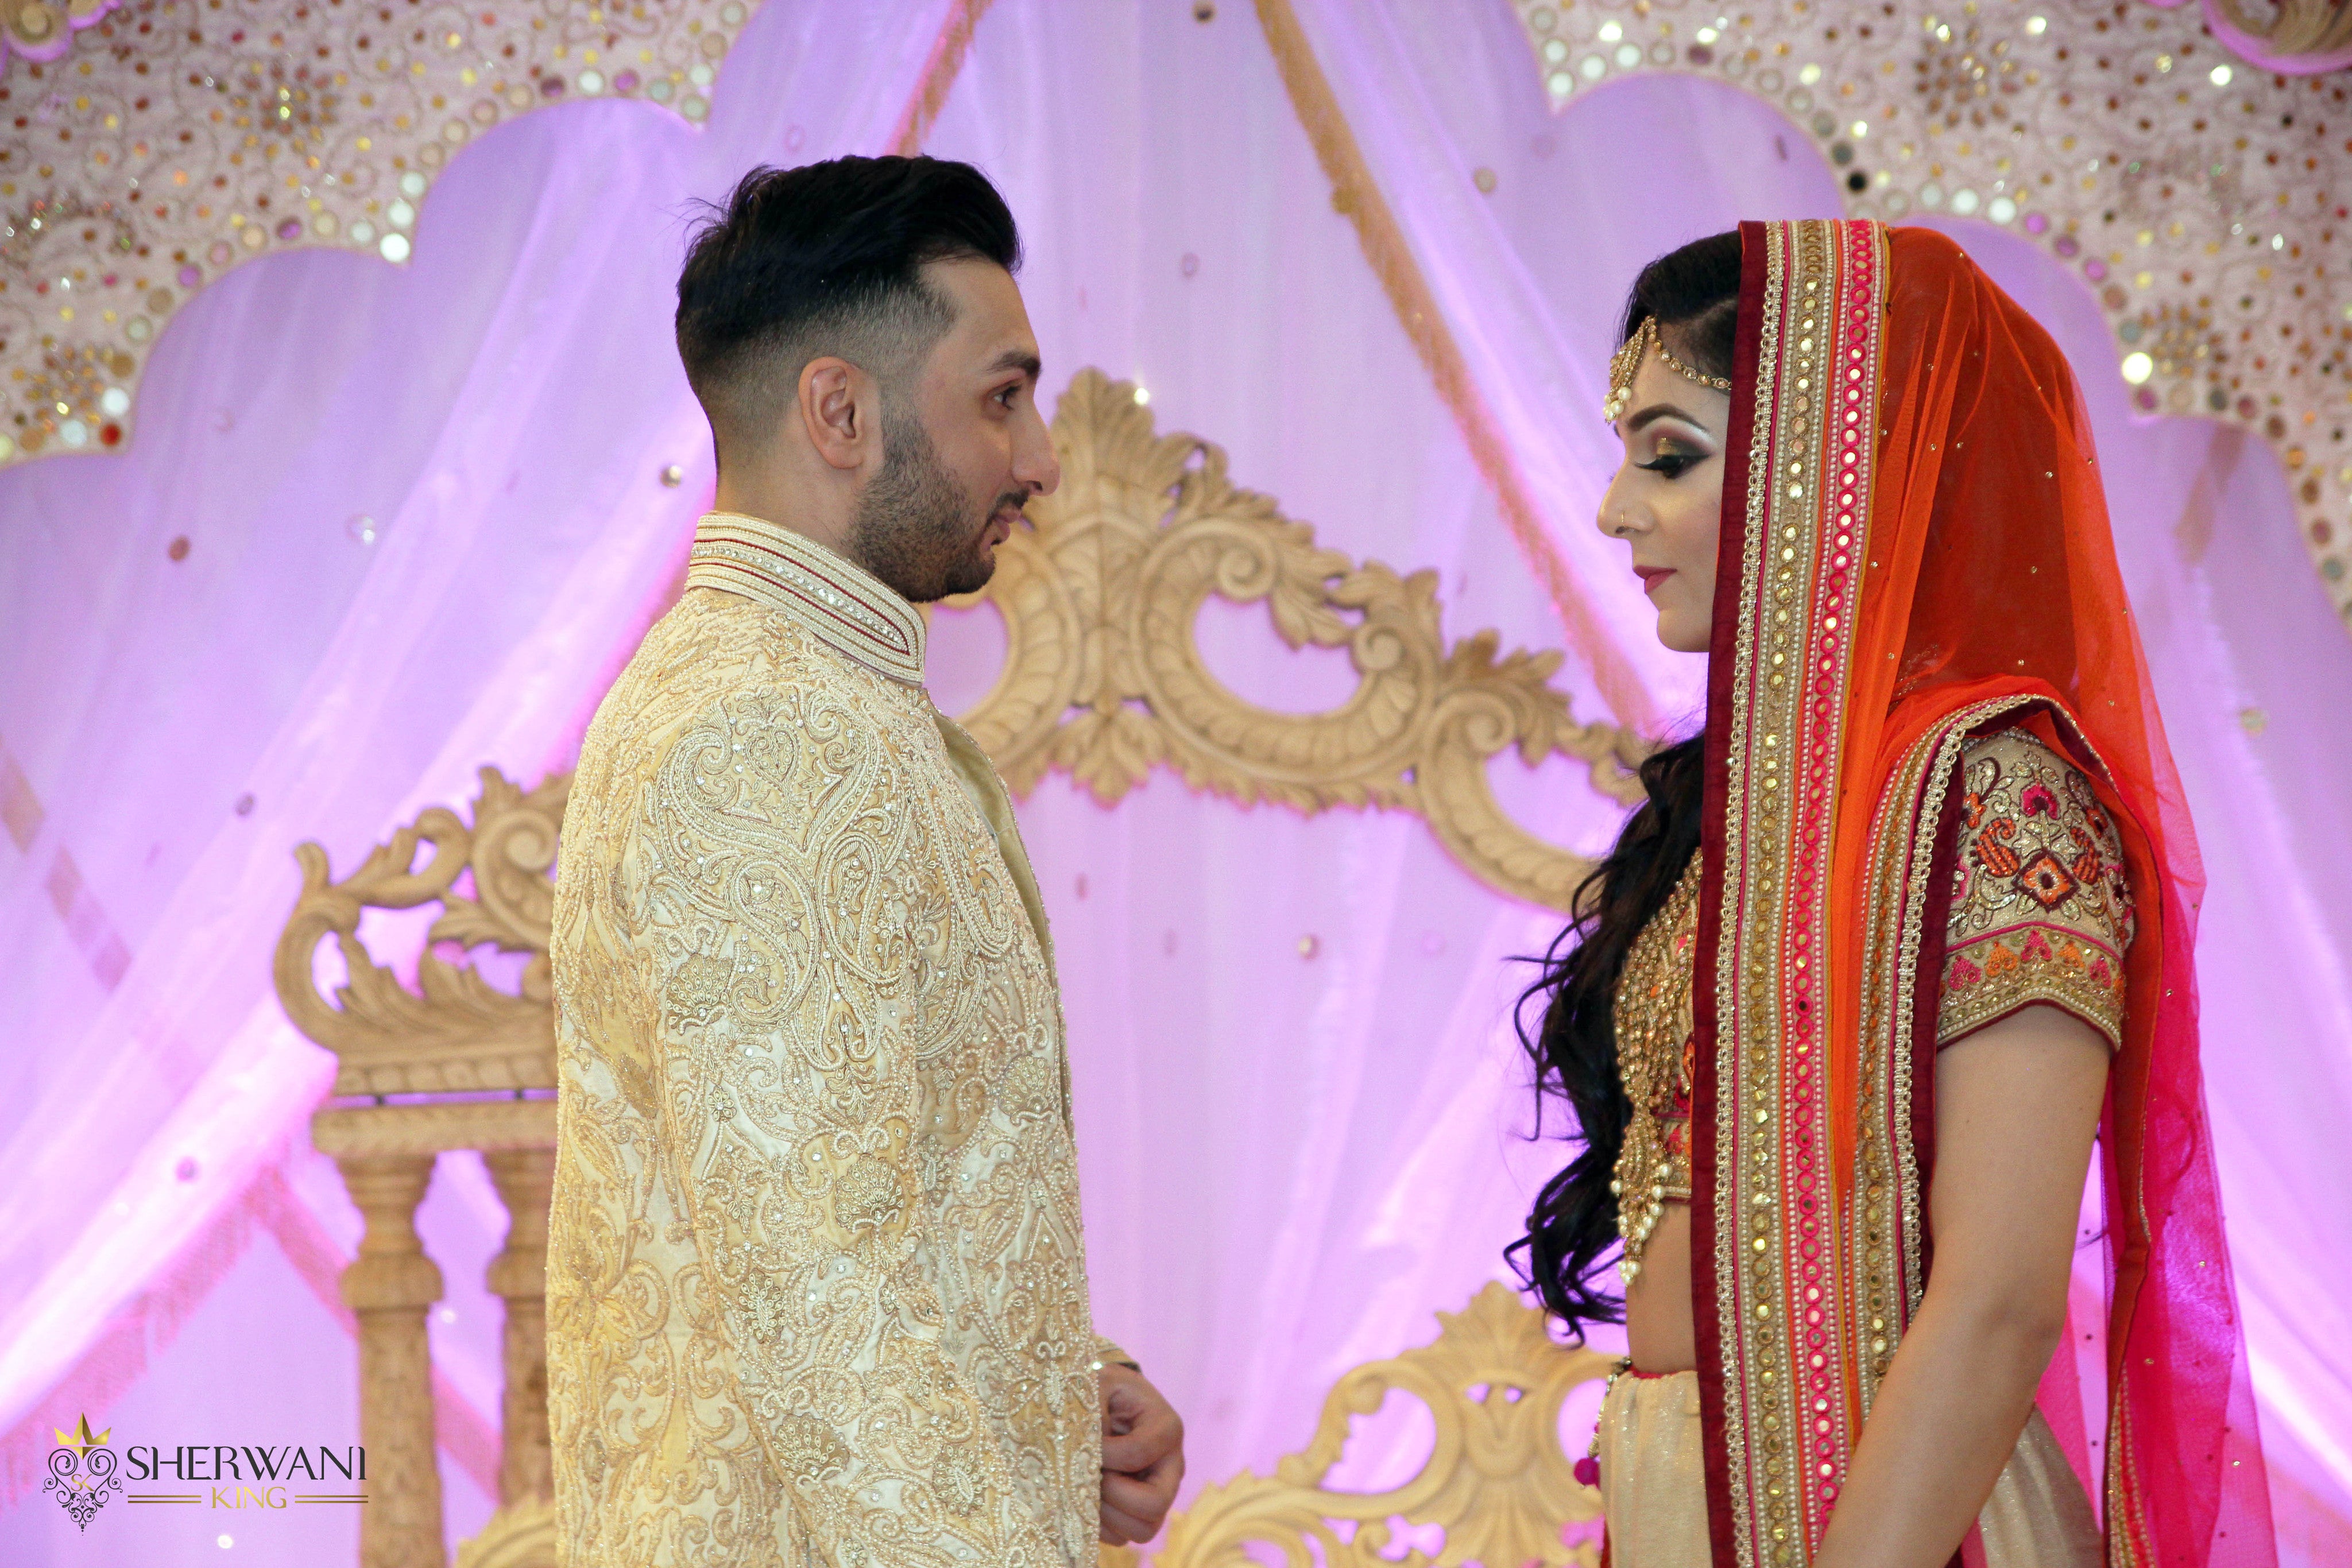 August 2019, Kolkata, India: Indian Groom Dressed in Sherwani with Stunning  Bride Standing with Glamorous Outfit and Jewellery Editorial Photography -  Image of fashion, bride: 157649752